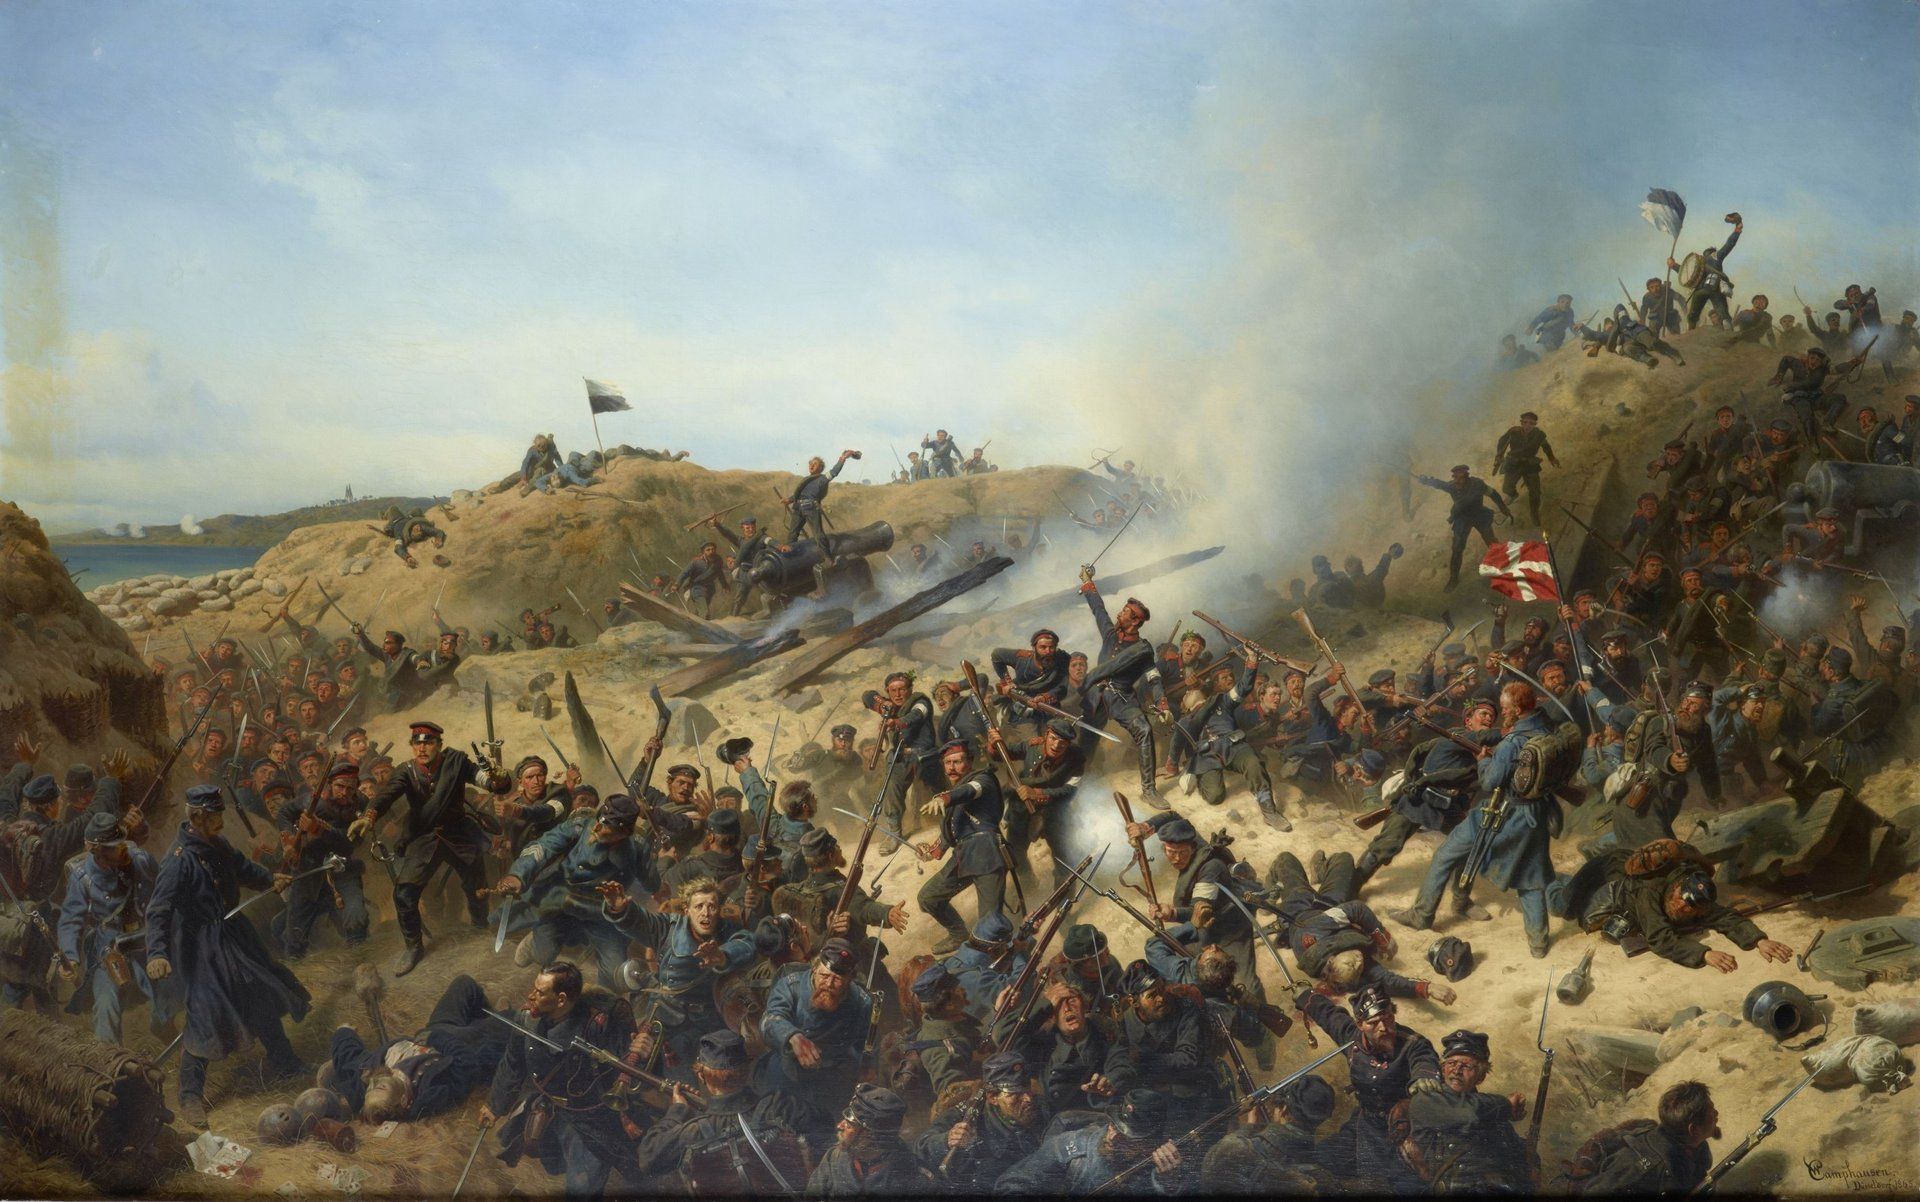 This dynamic oil painting depicts a scene from the Second Schleswig War. It portrays an intense battle scene with soldiers engaged in combat. The soldiers, wearing various uniforms indicating different regiments, are shown advancing through a sandy embankment towards an enemy position. The foreground is filled with infantry soldiers armed with rifles and bayonets, some in the heat of battle, others fallen. The smoke from gunfire partially obscures the background, where flags are being raised amid the fight. The dramatic sky above suggests the chaos of the battle. Details such as facial expressions, the movement of soldiers, and scattered war equipment on the ground contribute to the vivid representation of 19th-century warfare in this painting.